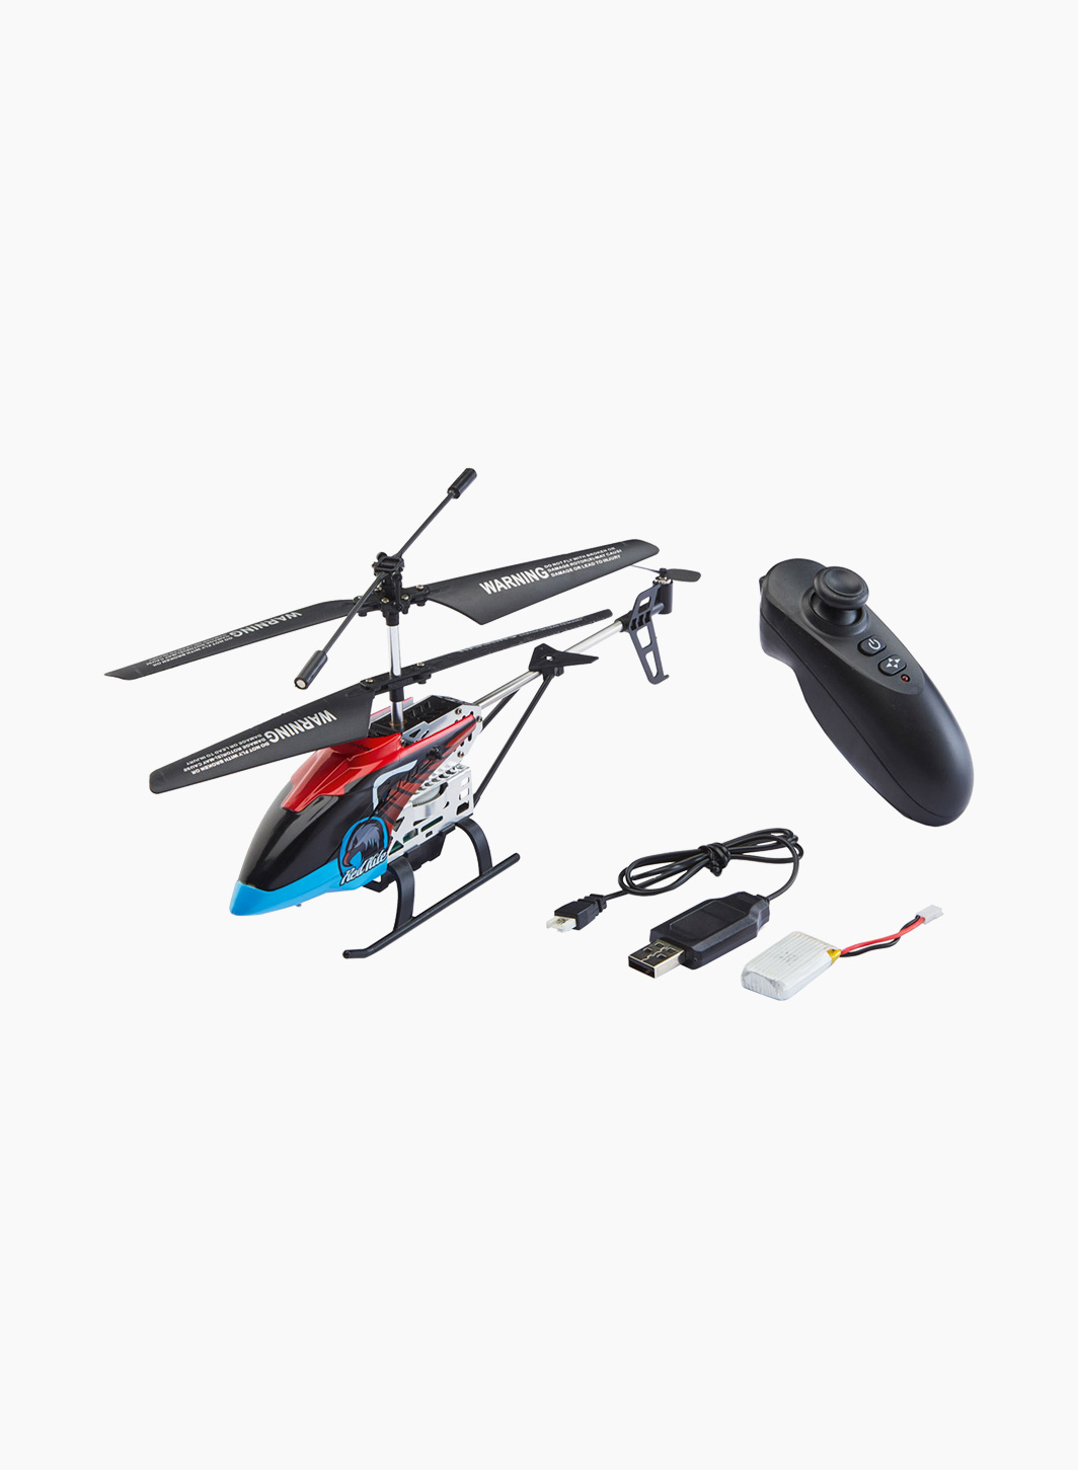 Revell Remote Control Helicopter Red Kite